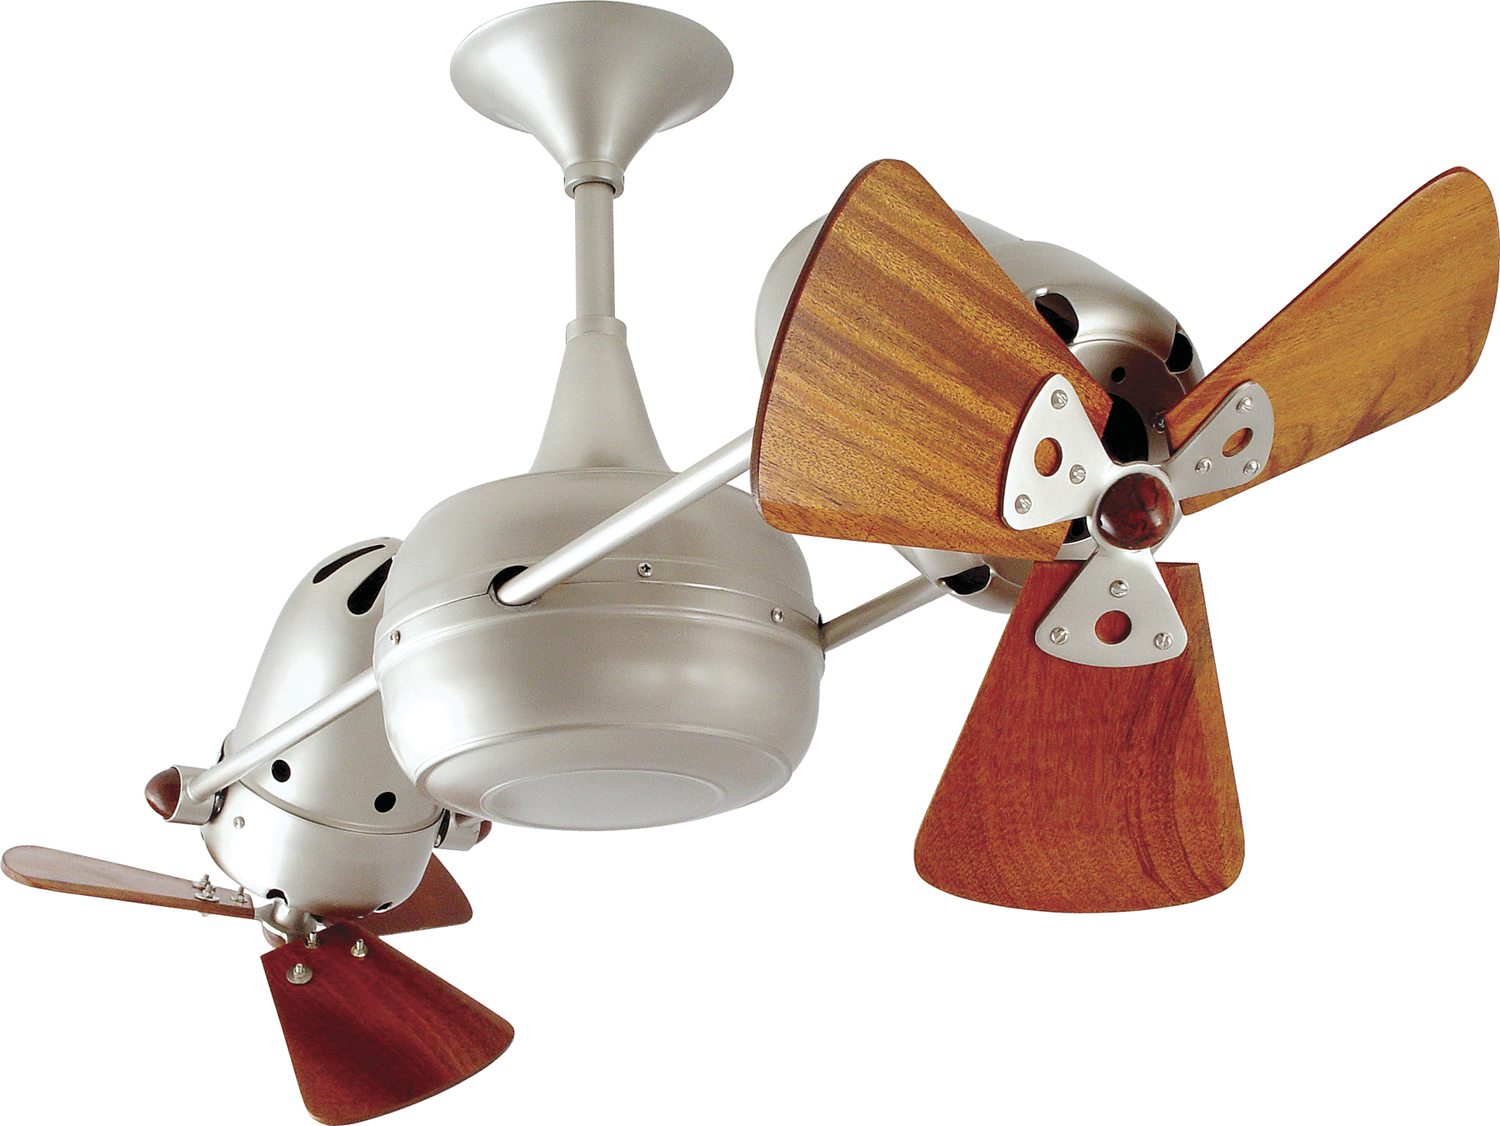 Duplo Dinamico Rotational Dual Head Ceiling Fan in Brushed Nickel Finish with Mahogany Wood Blades